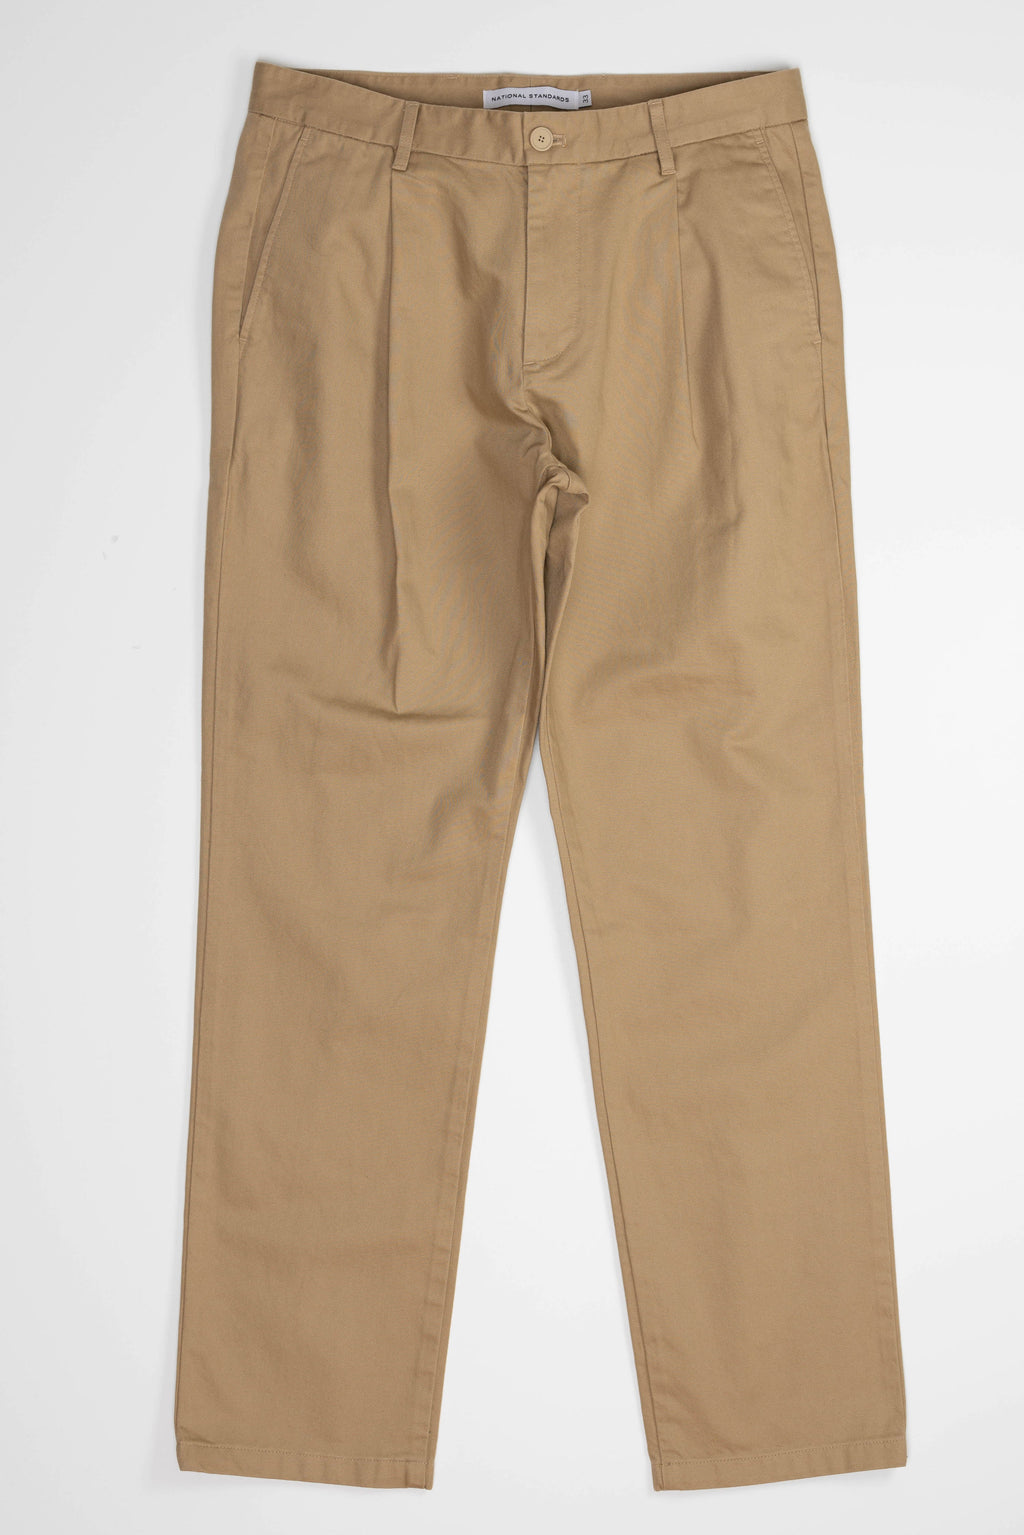 Pleated Chino Vintage French Drill in Khaki 01